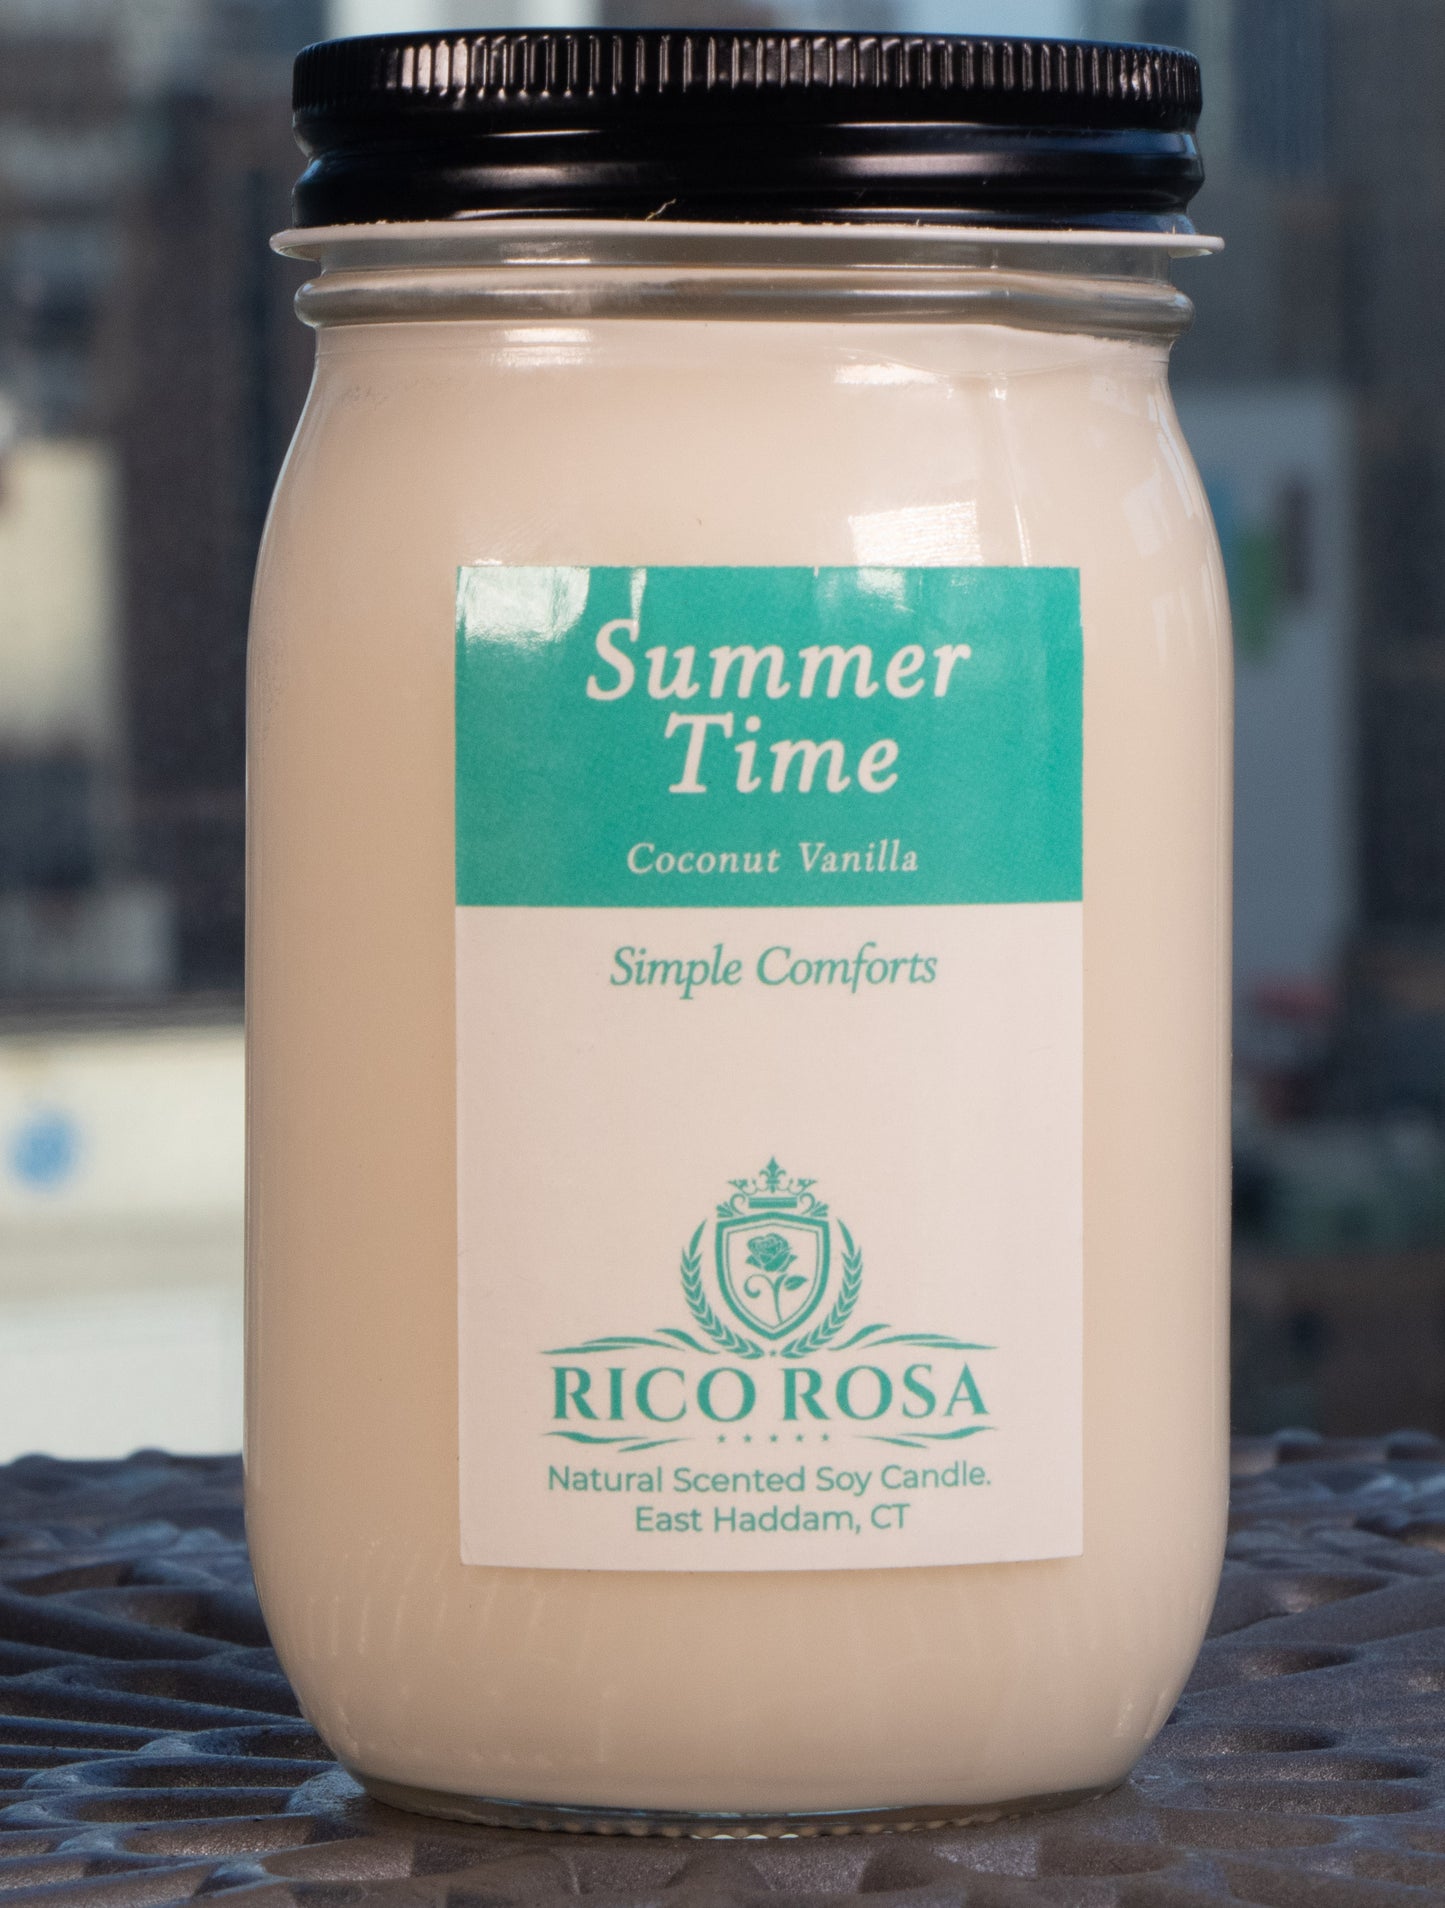 Summer Time: Coconut Vanilla Scented Natural Soy Candle